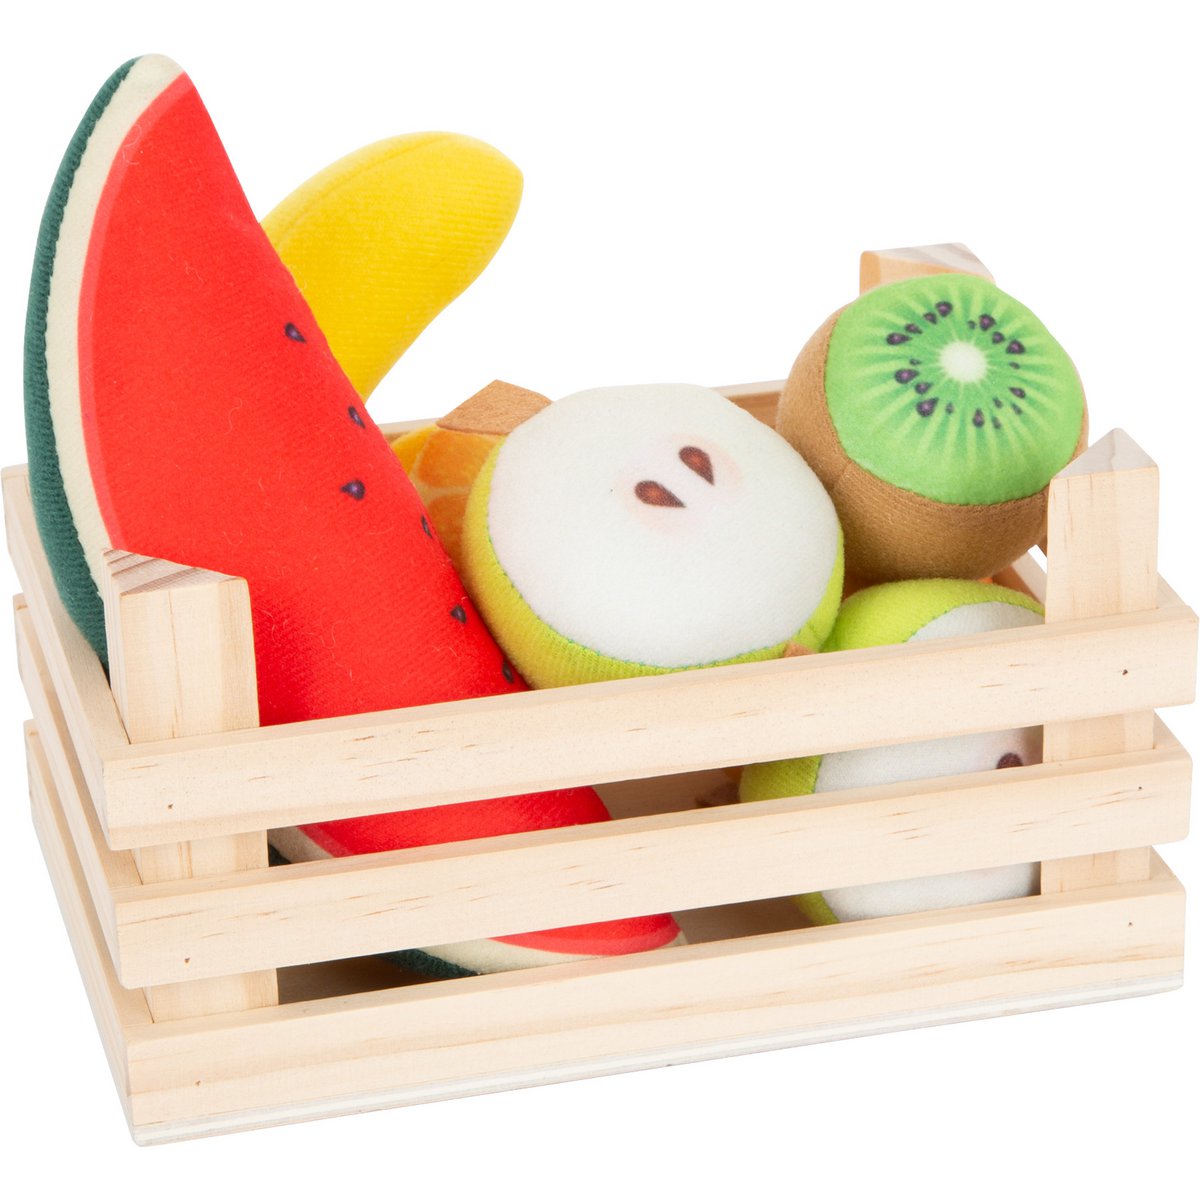 Fabric Fruit Set in a Wooden Crate